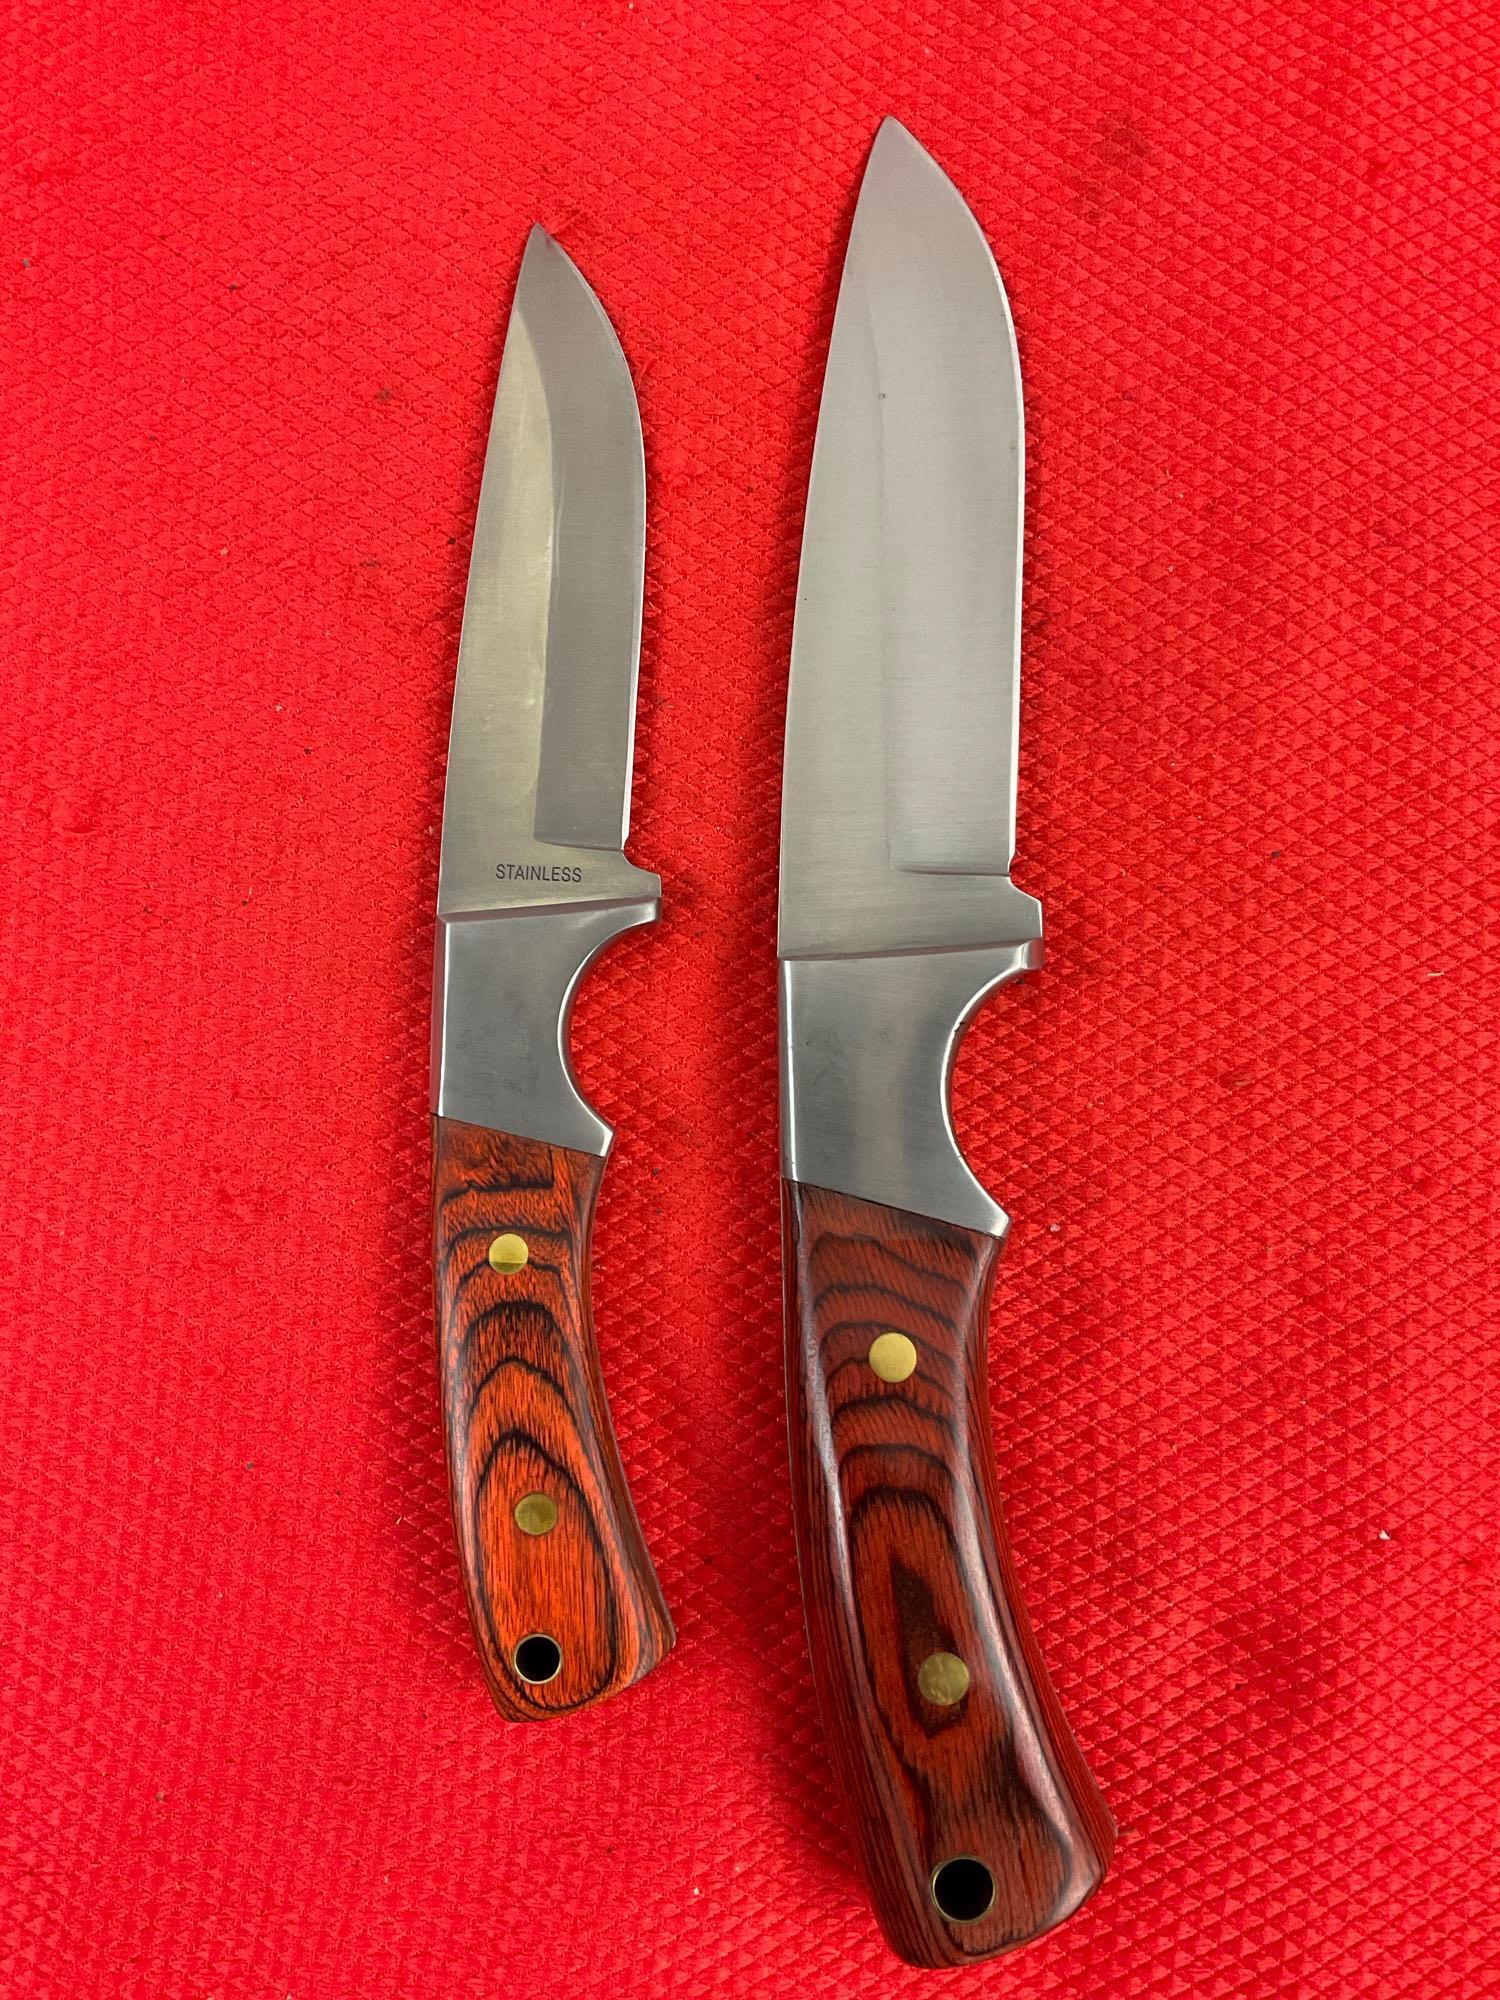 2 pcs Modern Winchester Steel Fixed Blade Hunting Knives w/ NRA Logo & Sheathes. See pics.